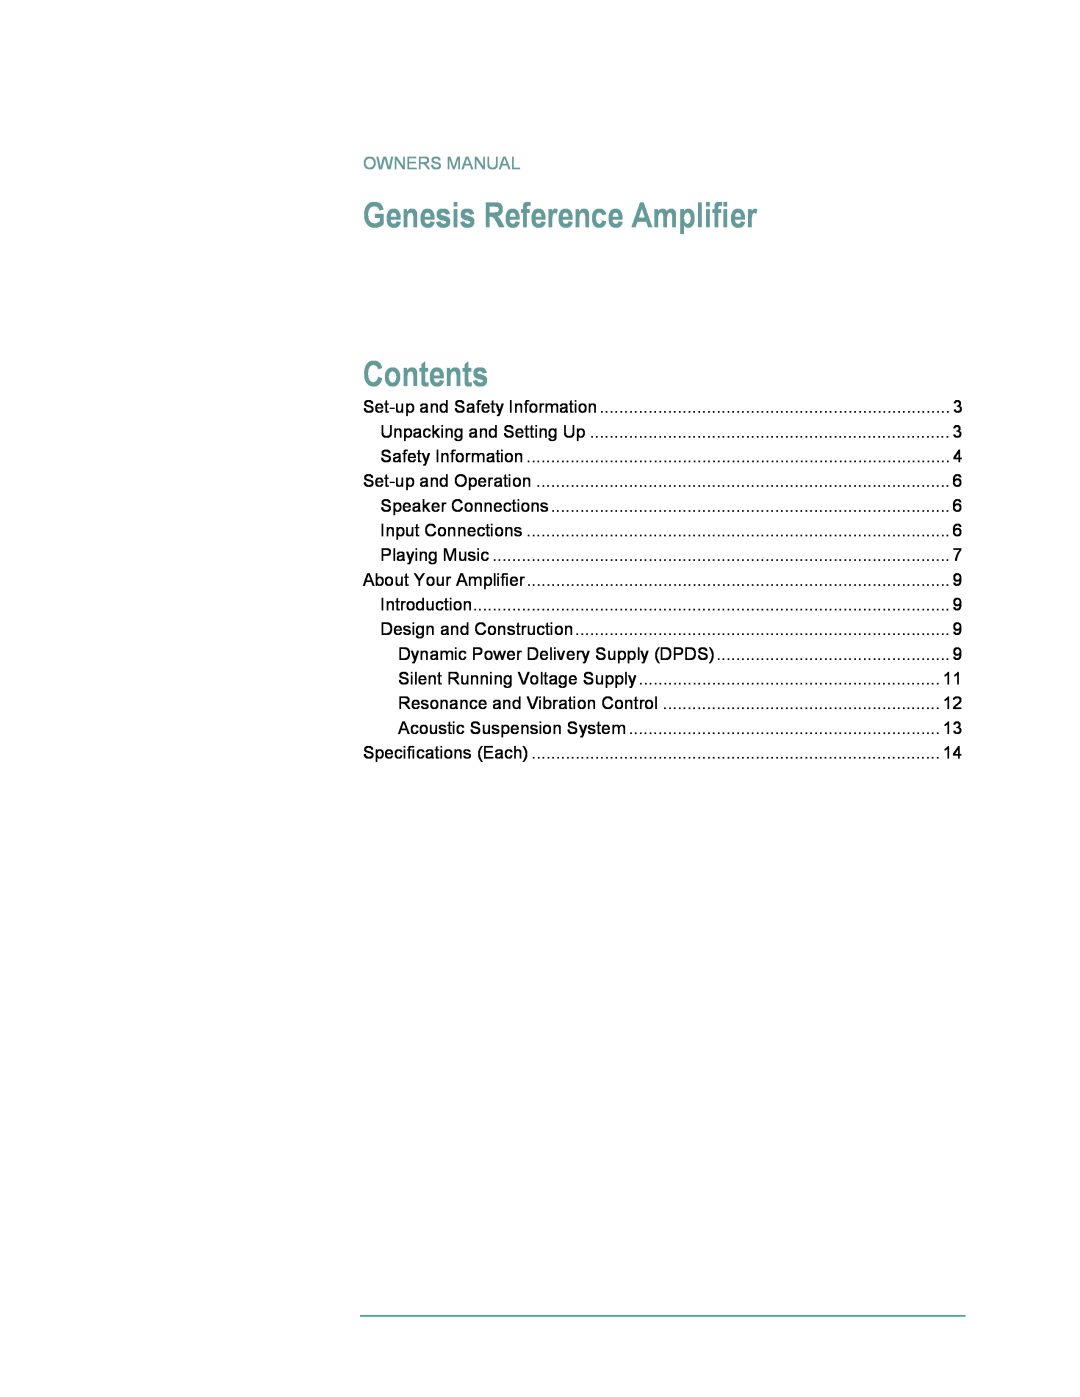 Genesis Advanced Technologies None owner manual Genesis Reference Amplifier, Contents, Owners Manual 